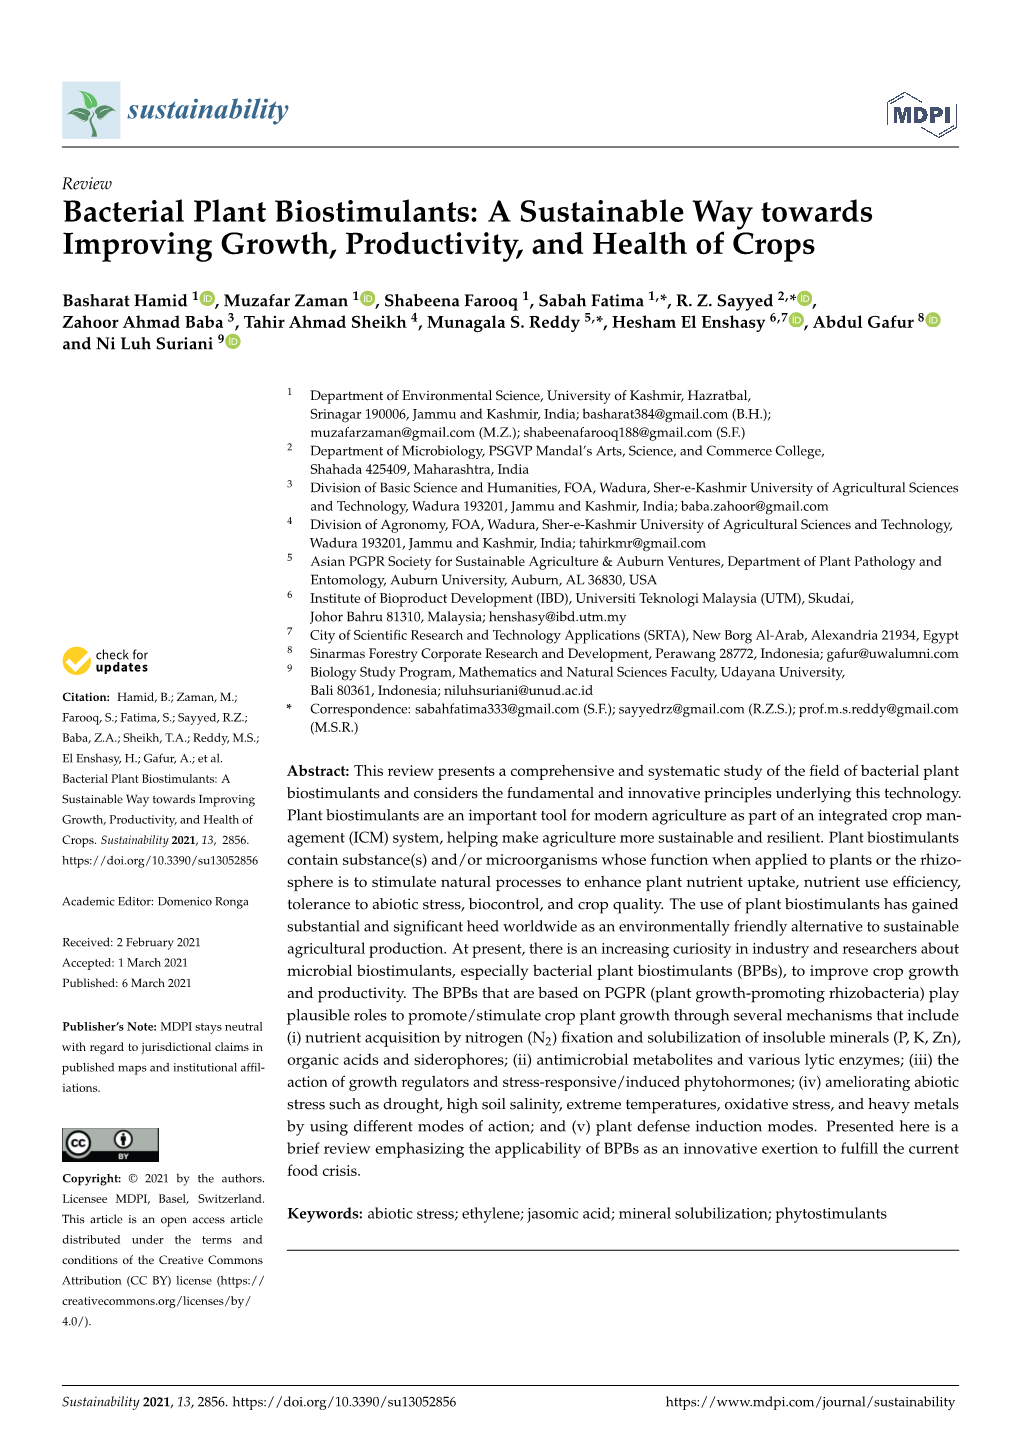 Bacterial Plant Biostimulants: a Sustainable Way Towards Improving Growth, Productivity, and Health of Crops